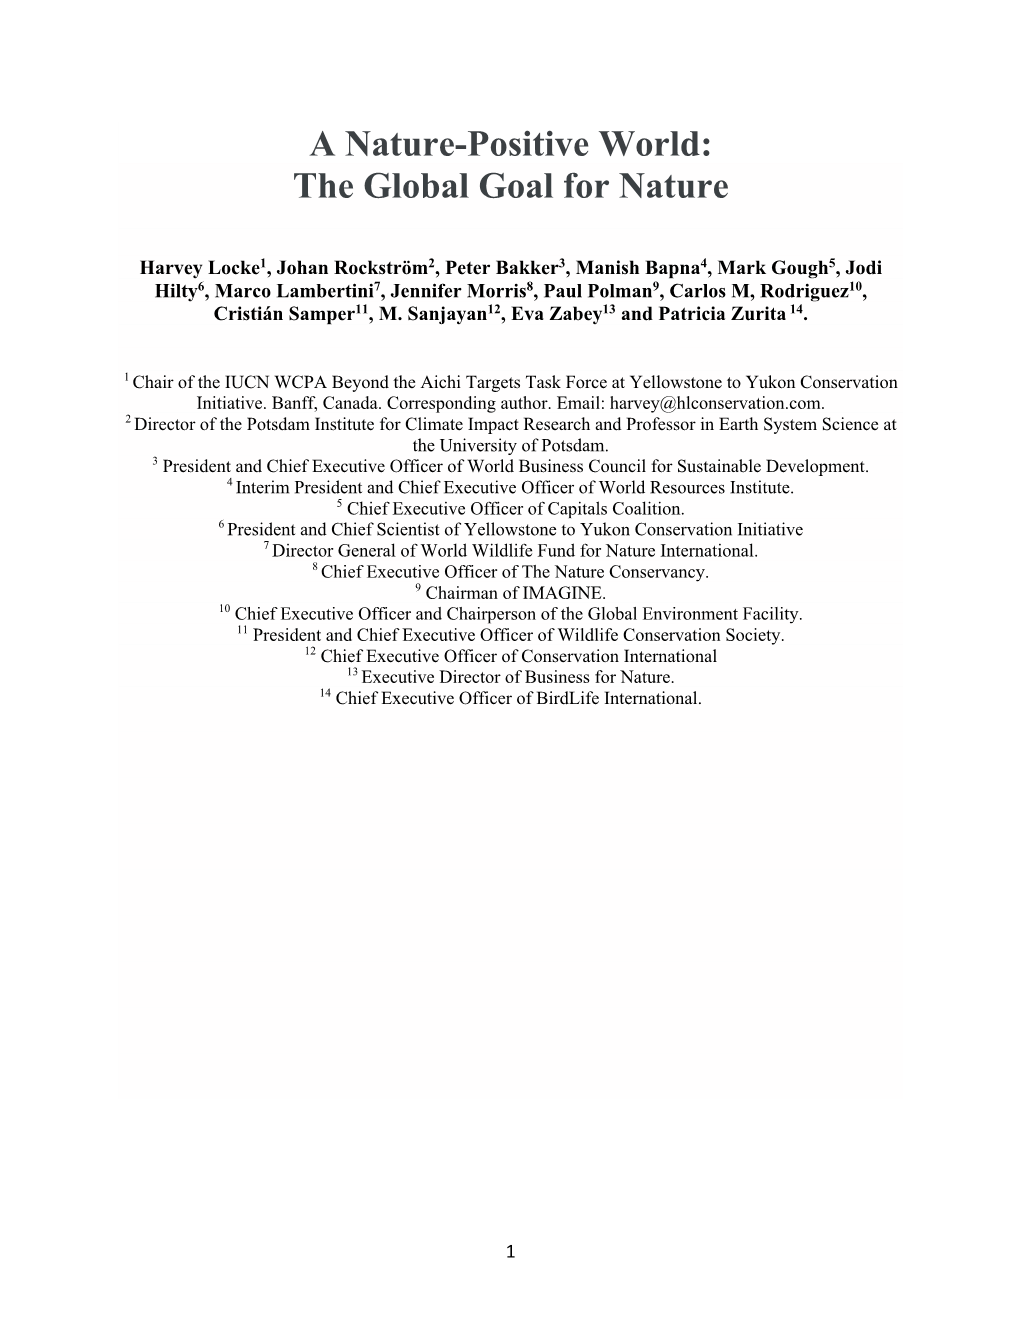 A Nature-Positive World: the Global Goal for Nature